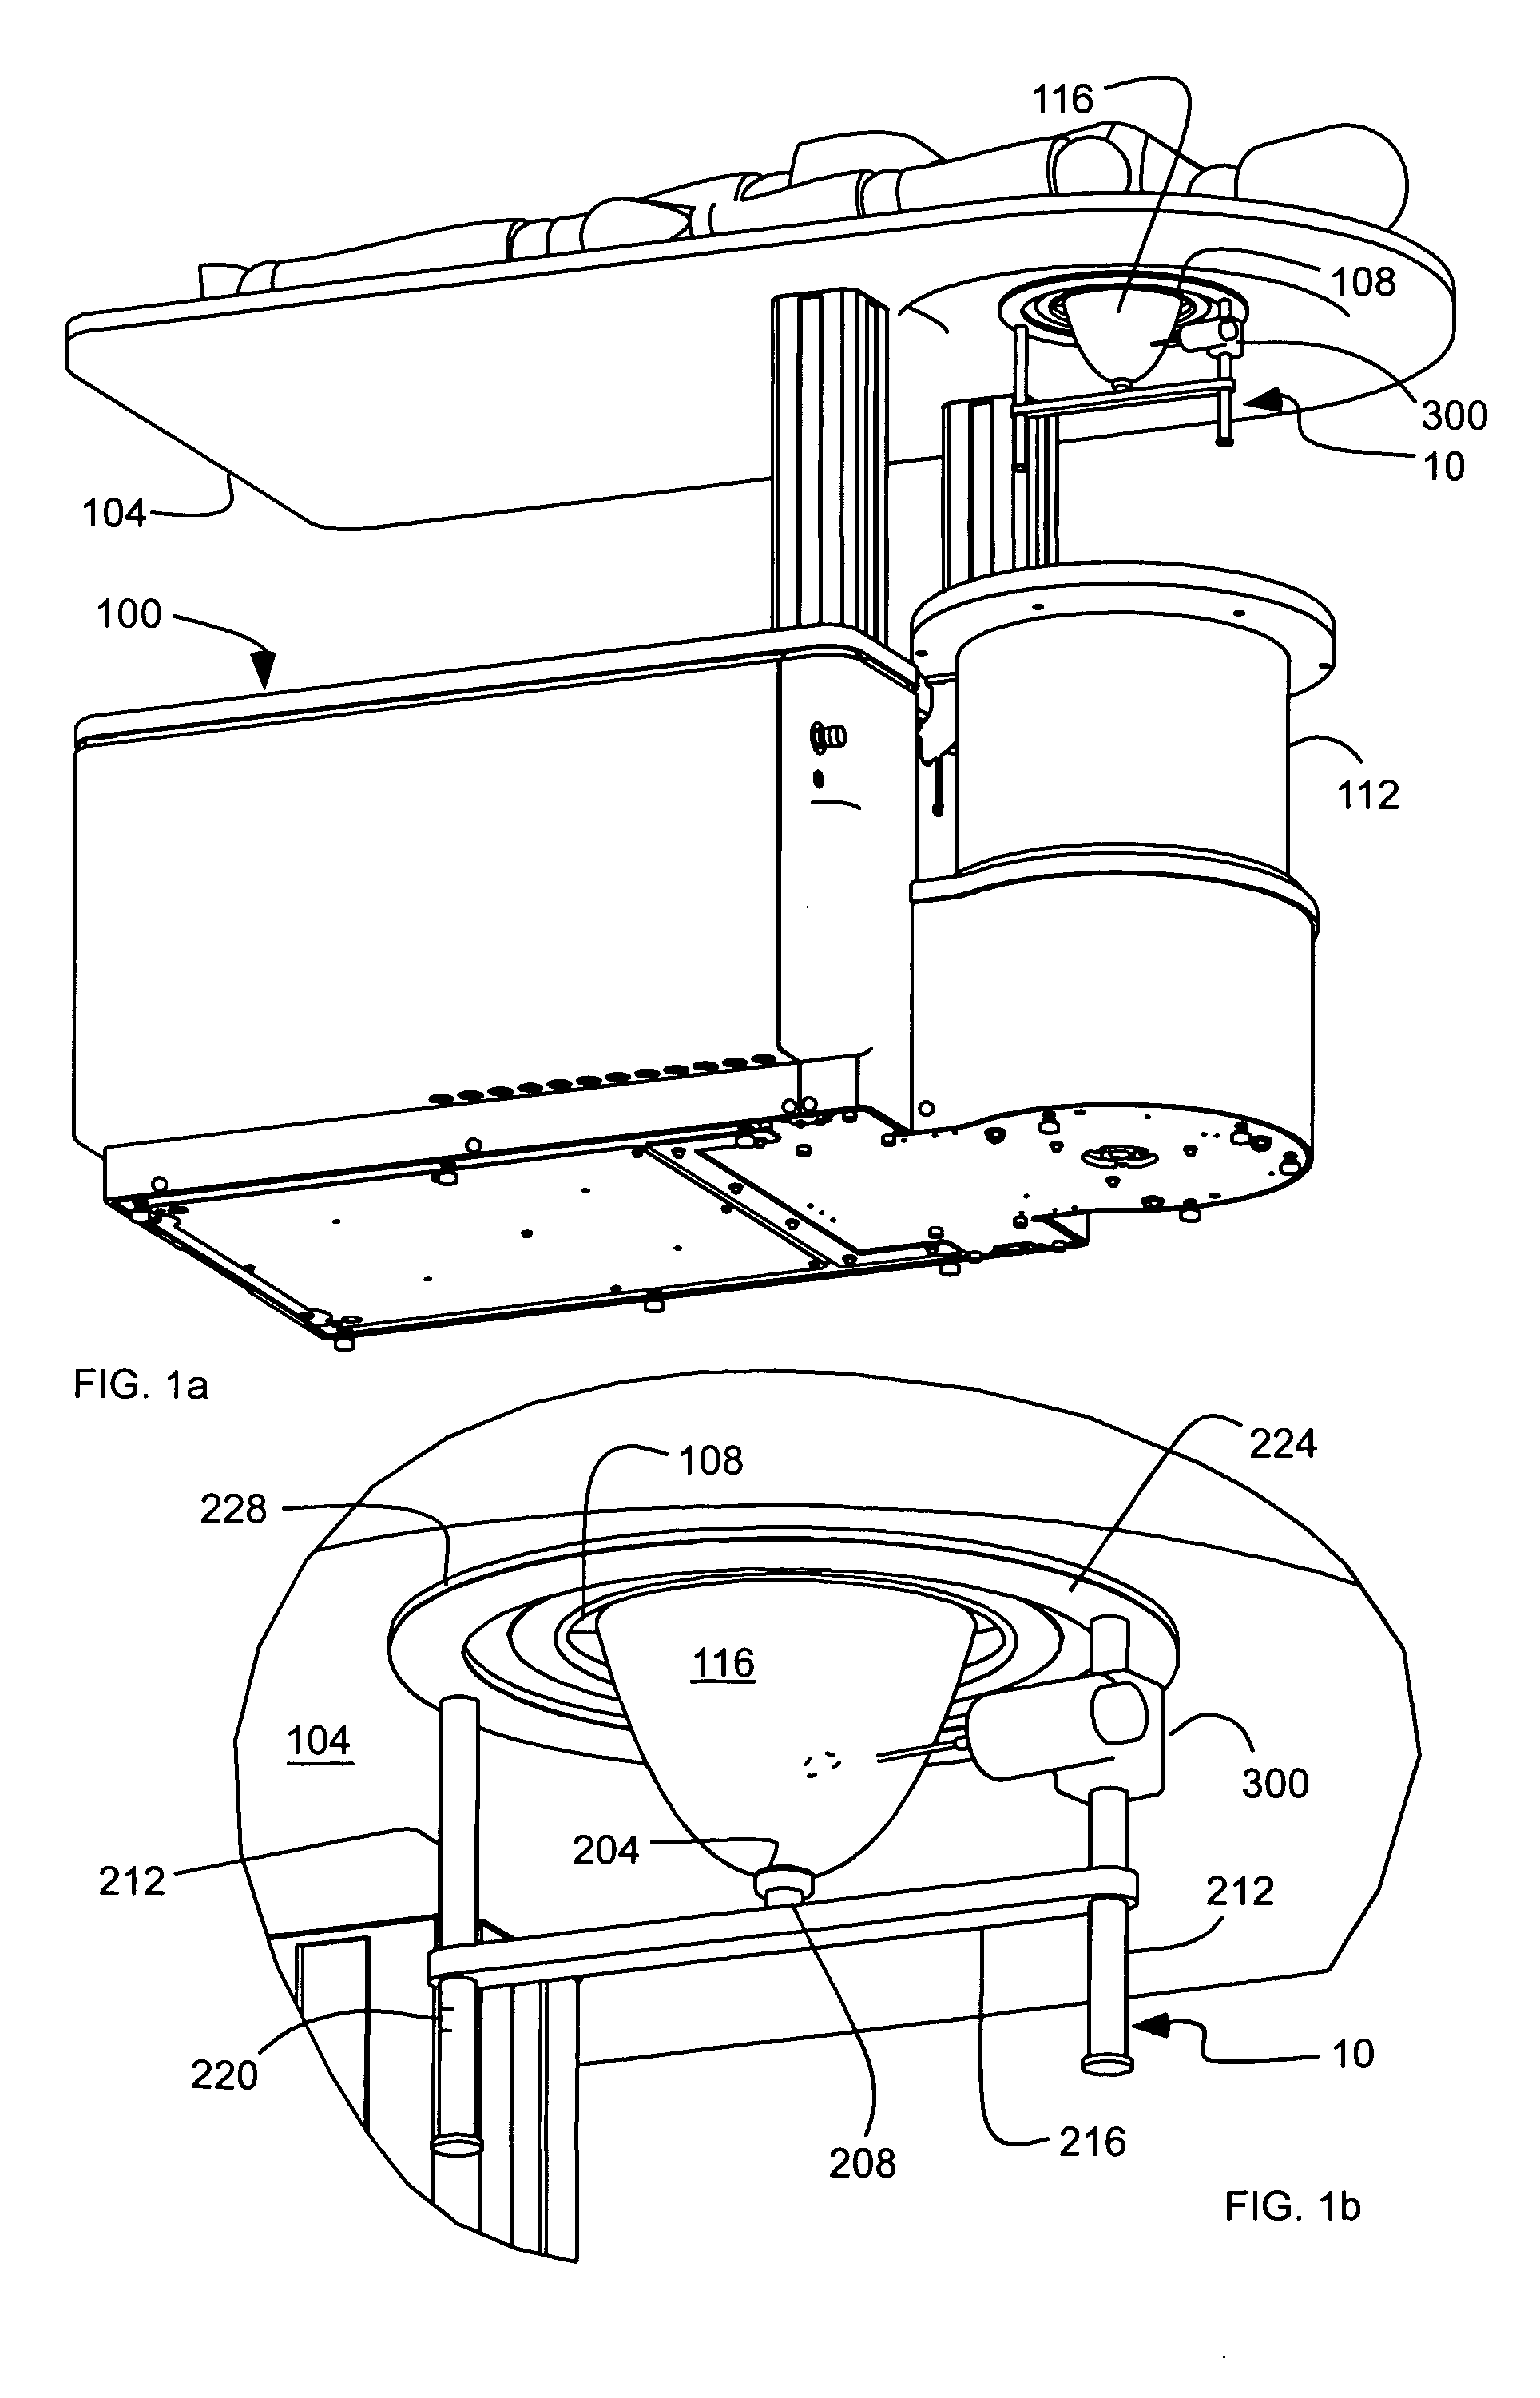 Apparatus for imaging and treating a breast